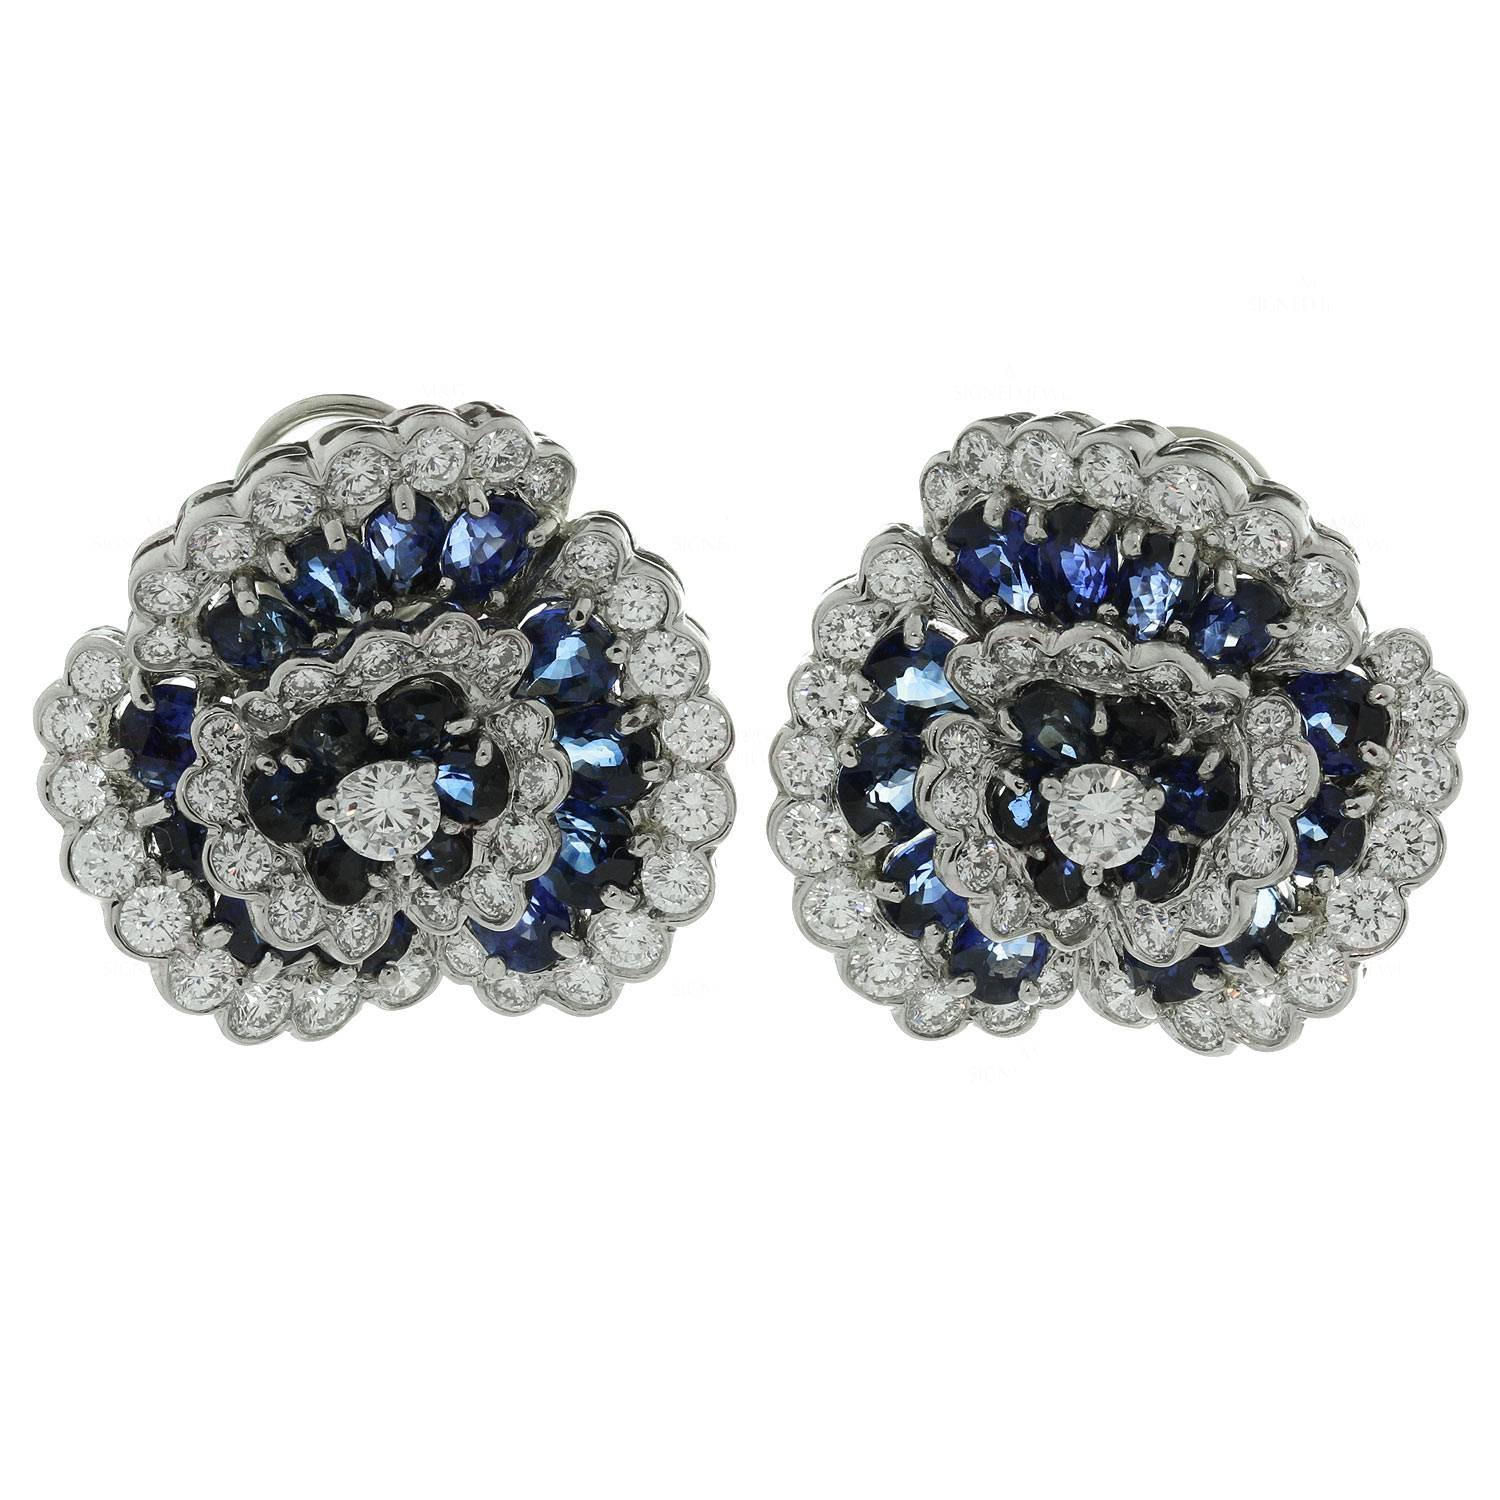 These gorgeous clip-on earrings from the Camelia collection by Van Cleef & Arpels feature a flower design crafted in platinum and accented with 86 brilliant circular-cut diamonds of an estimated 3.60 carats and 24 oval-cut sparkling bright blue